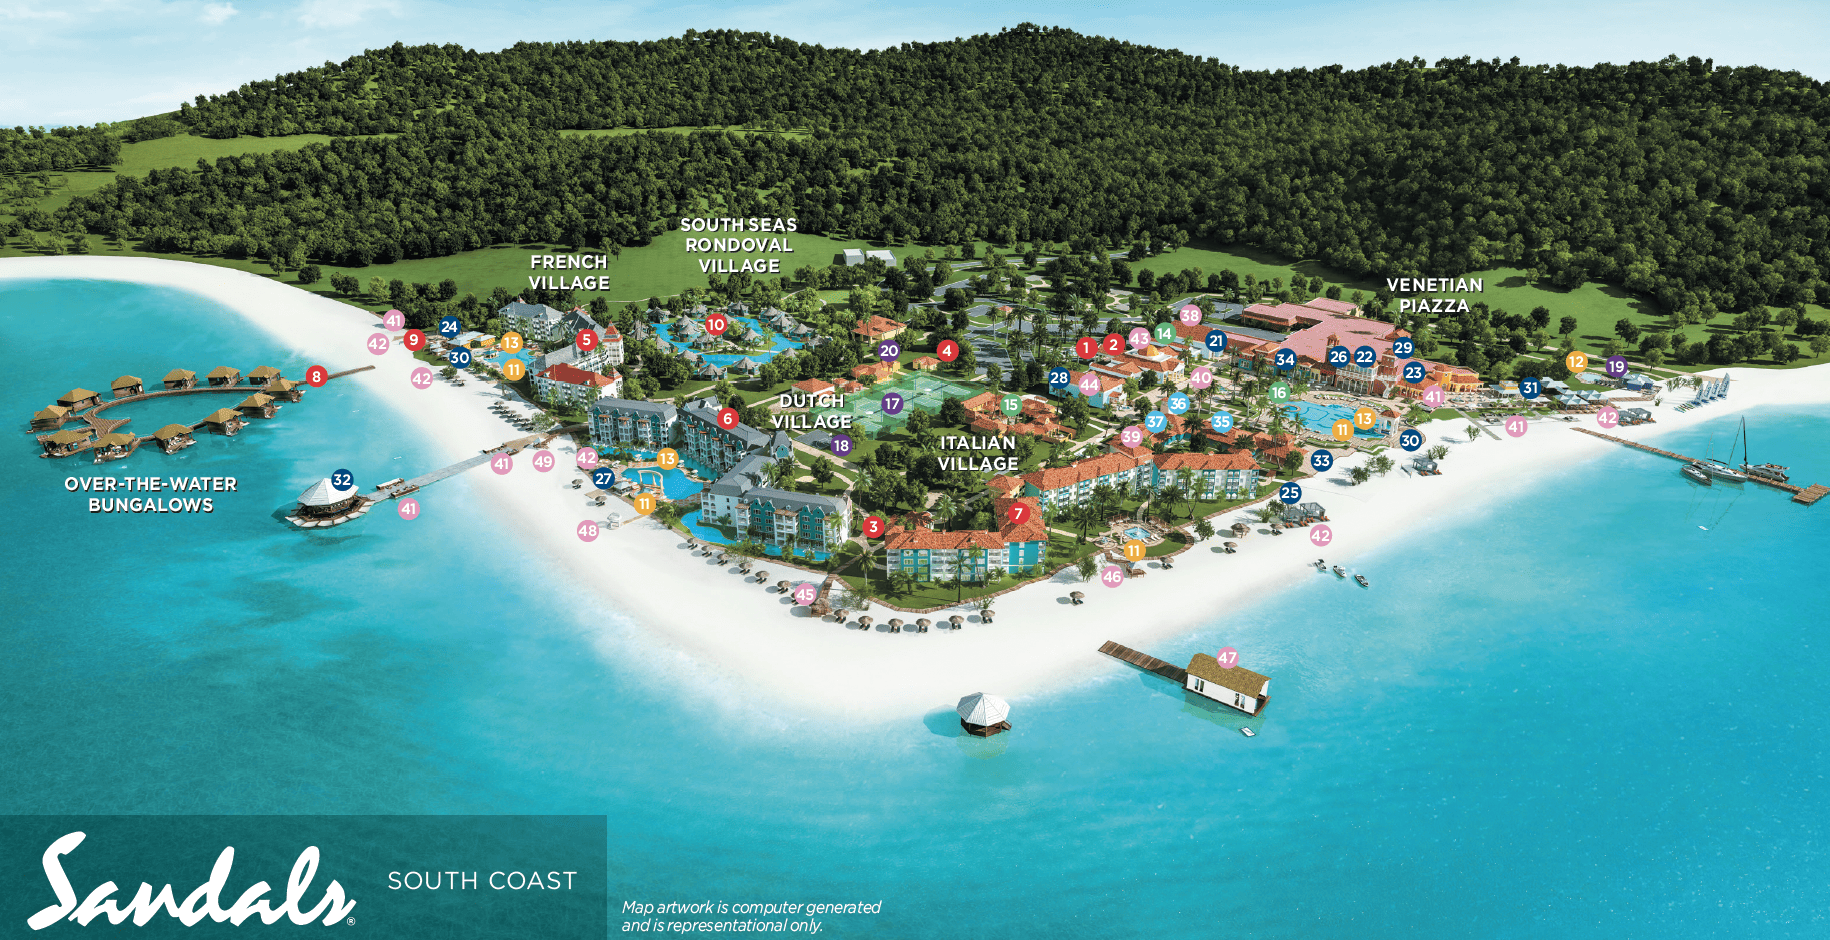 Sandals Ocho Rios – Witkin Hults + Partners